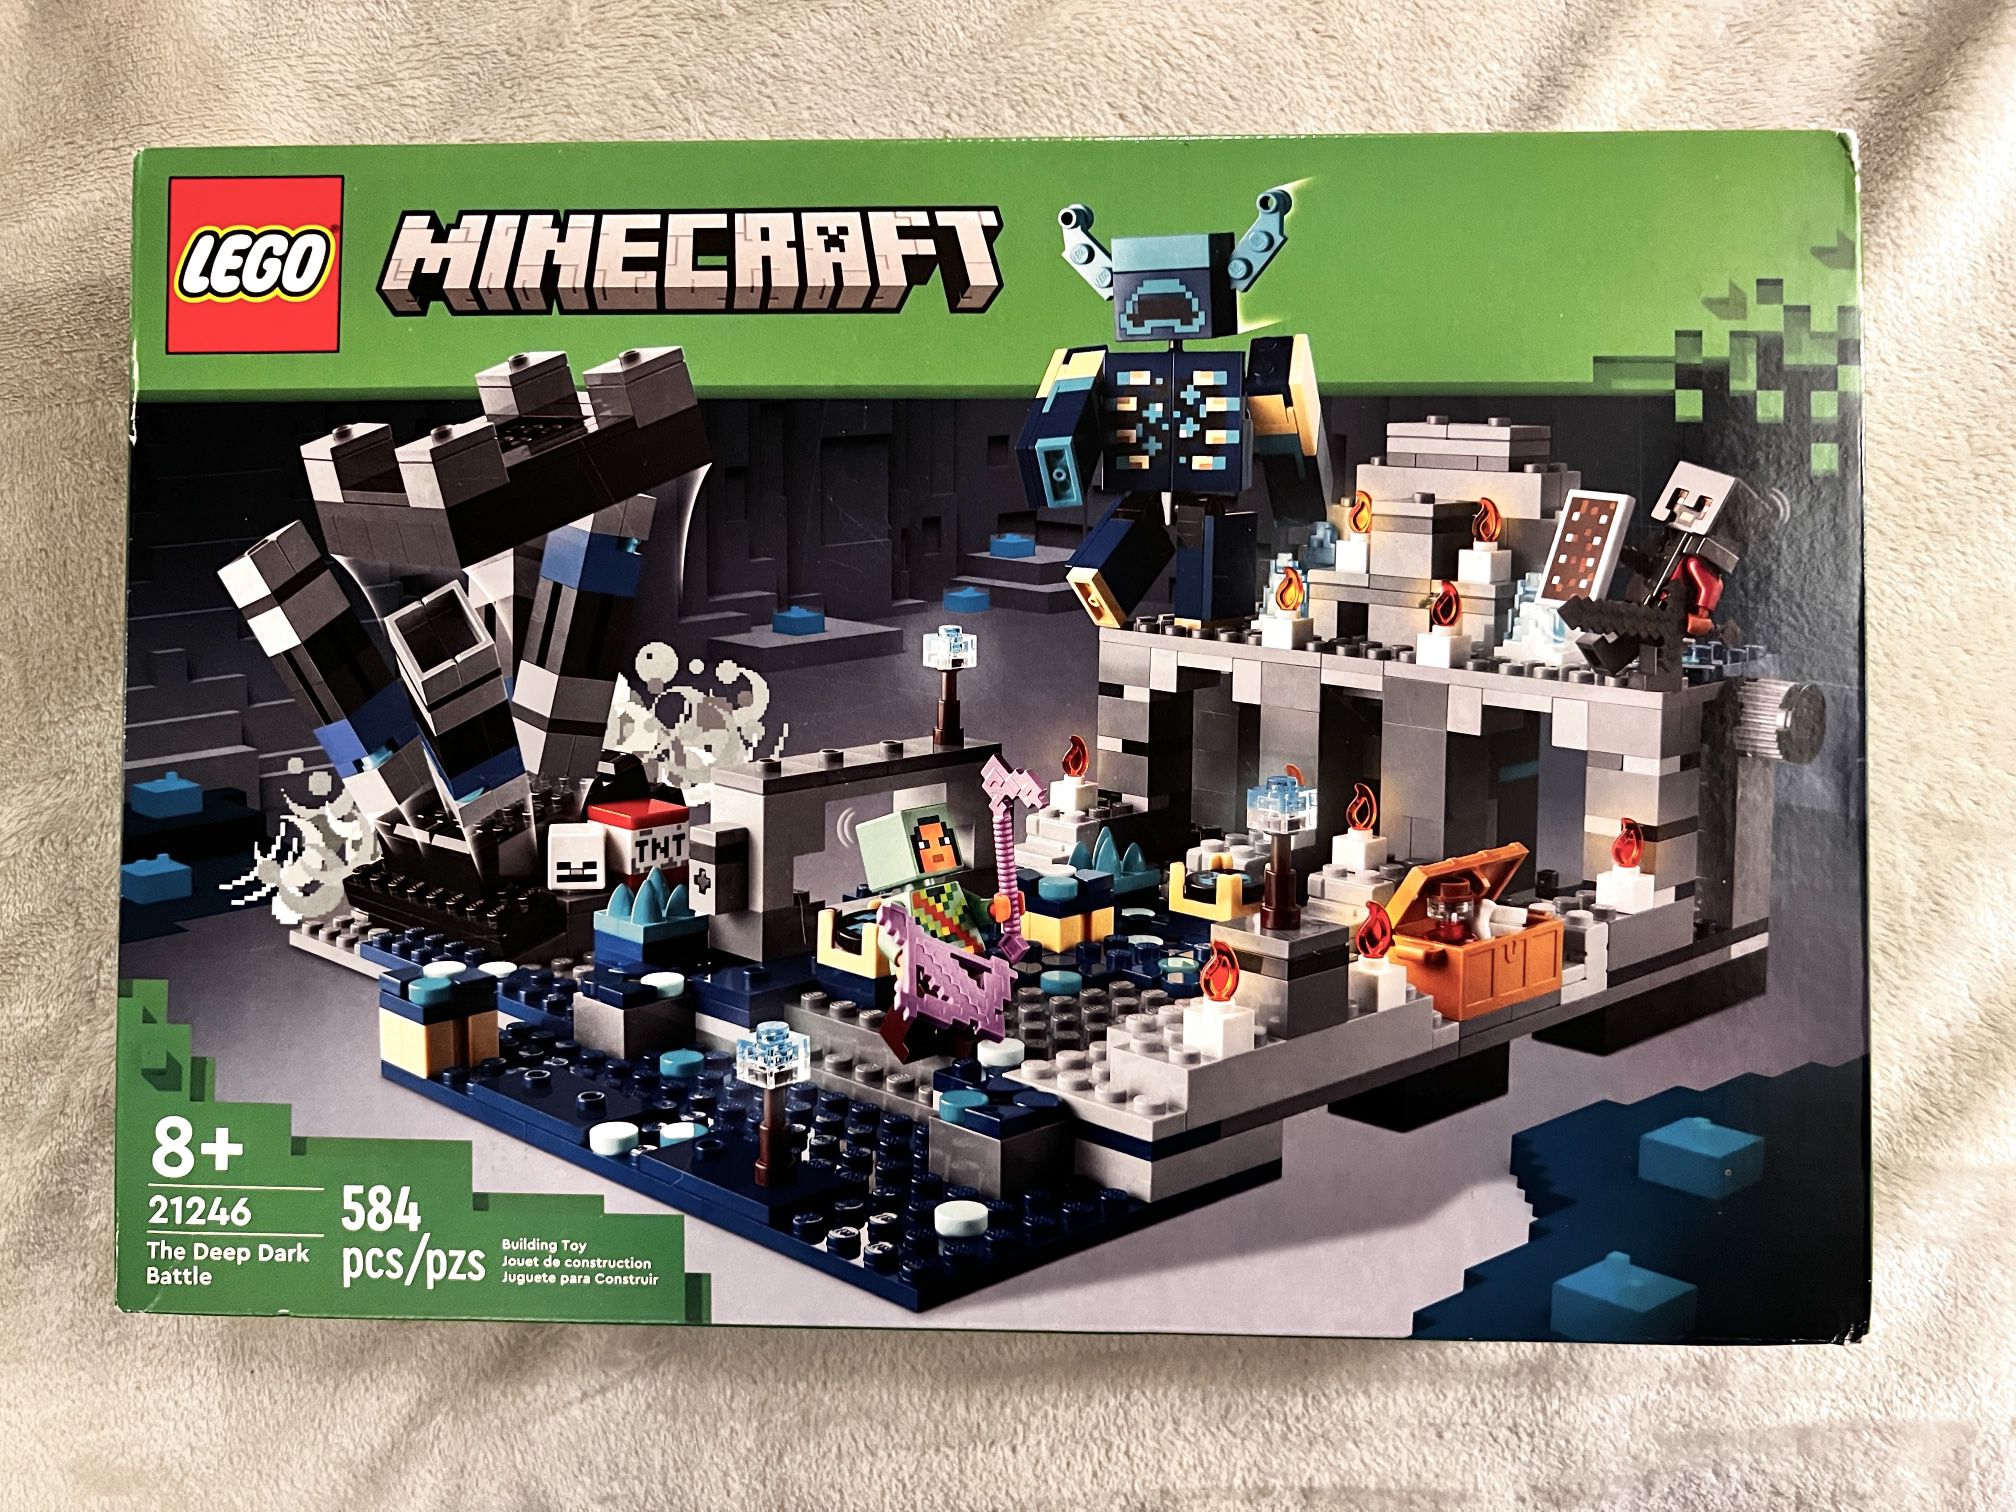 Lego Minecraft NEW! (MSRP $51.99 Not Including Taxes)